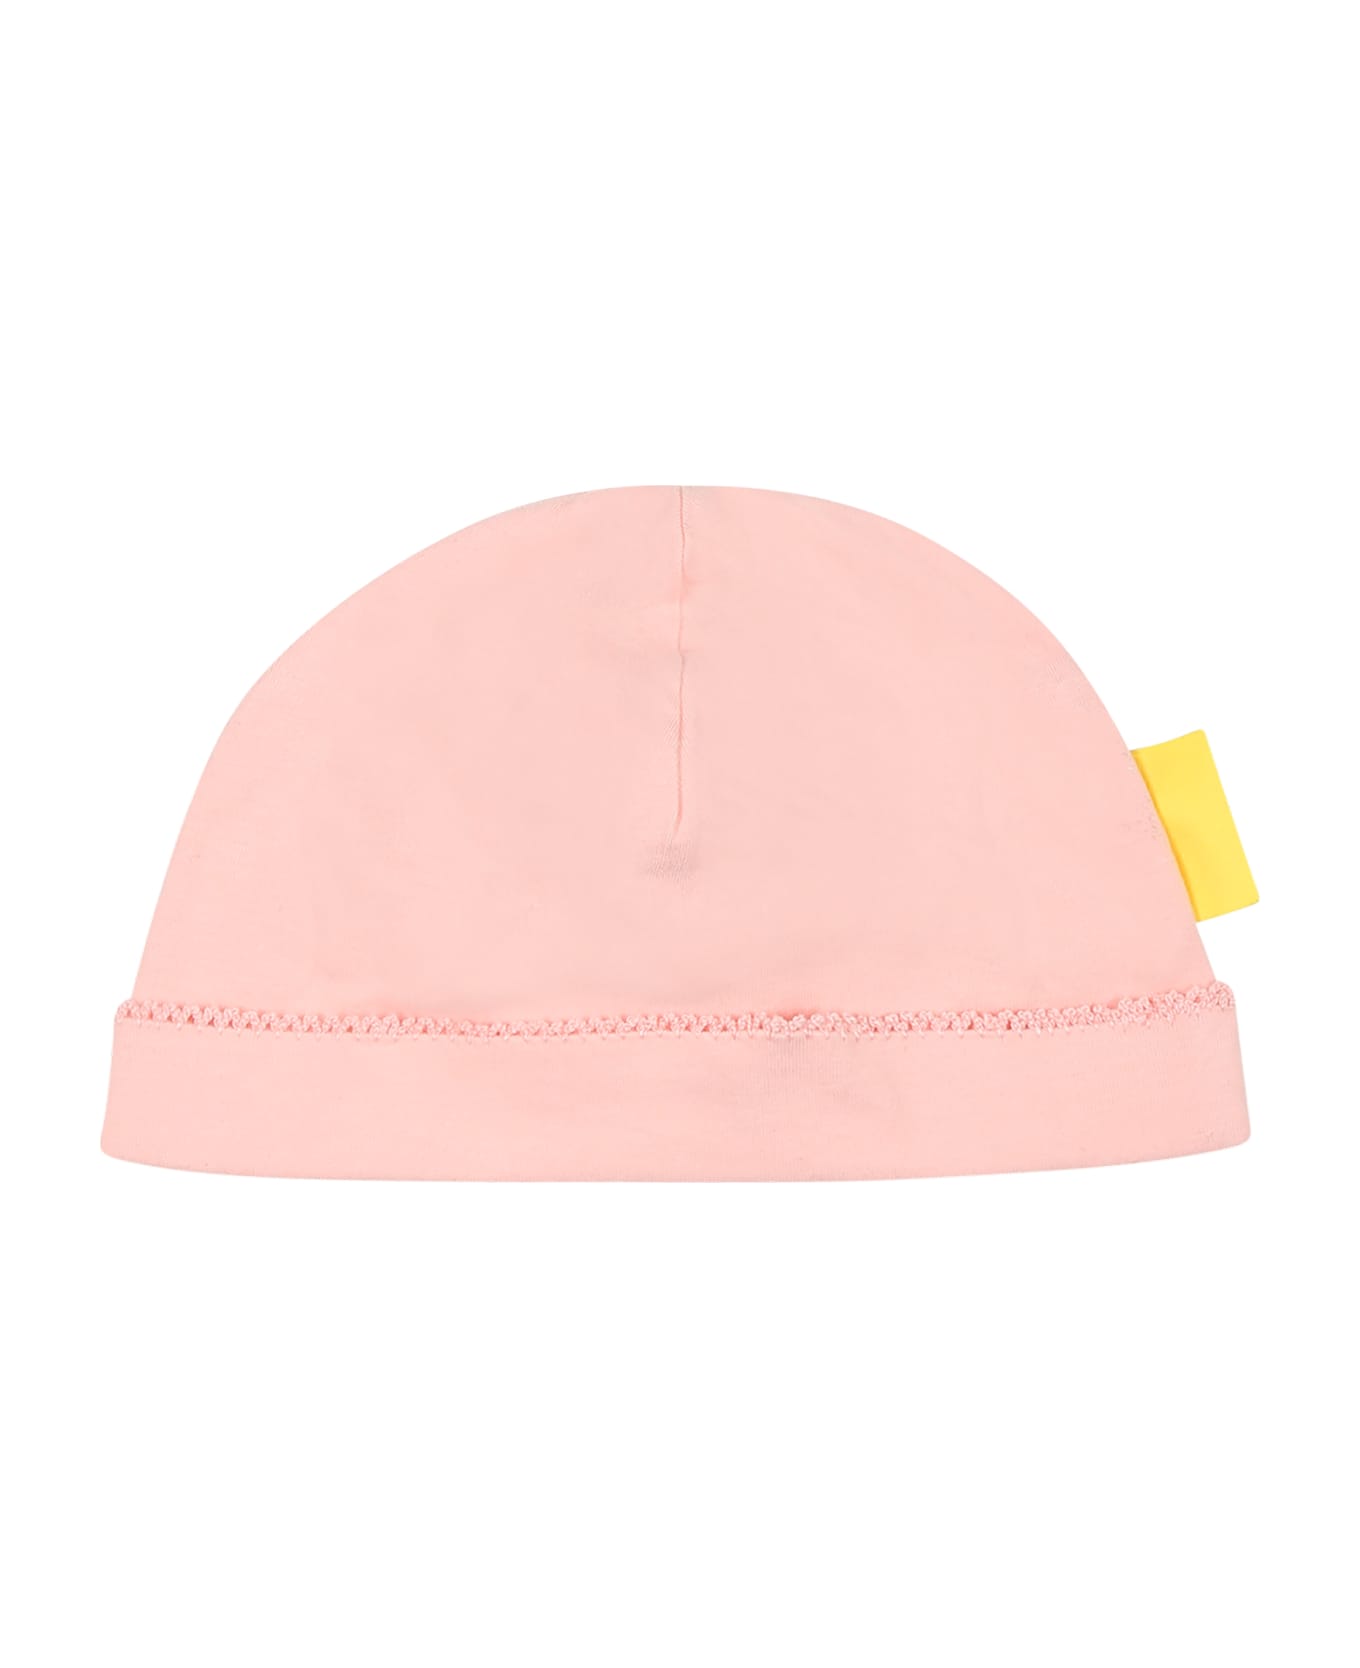 Off-White Pink Set For Baby Boy - Pink